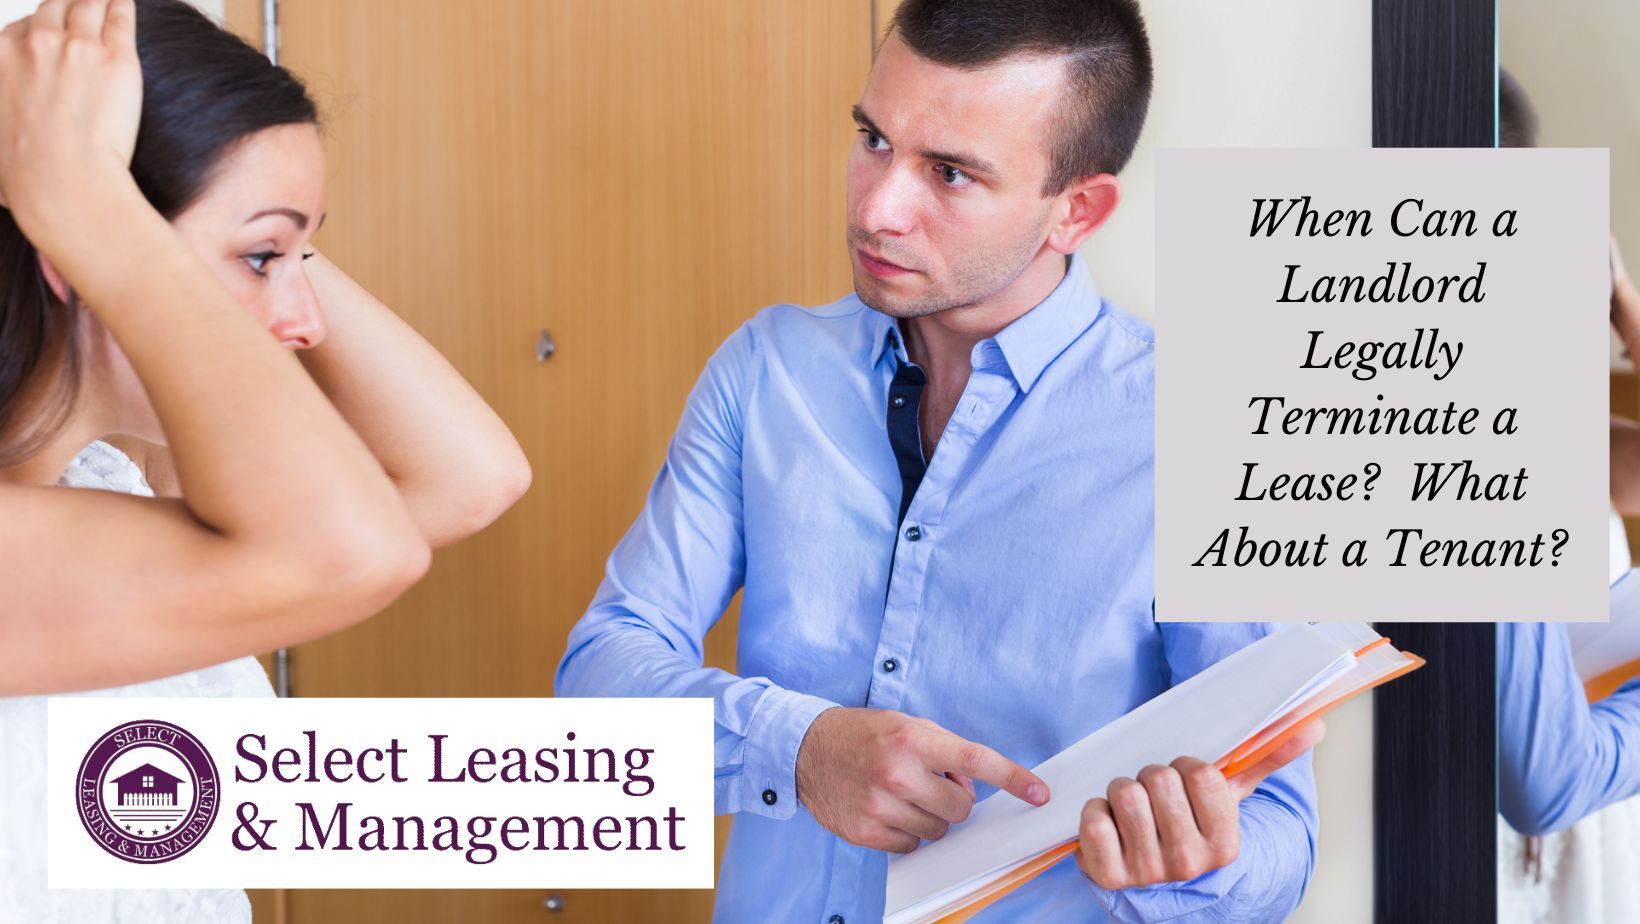 landlord terminating a lease with a tenant